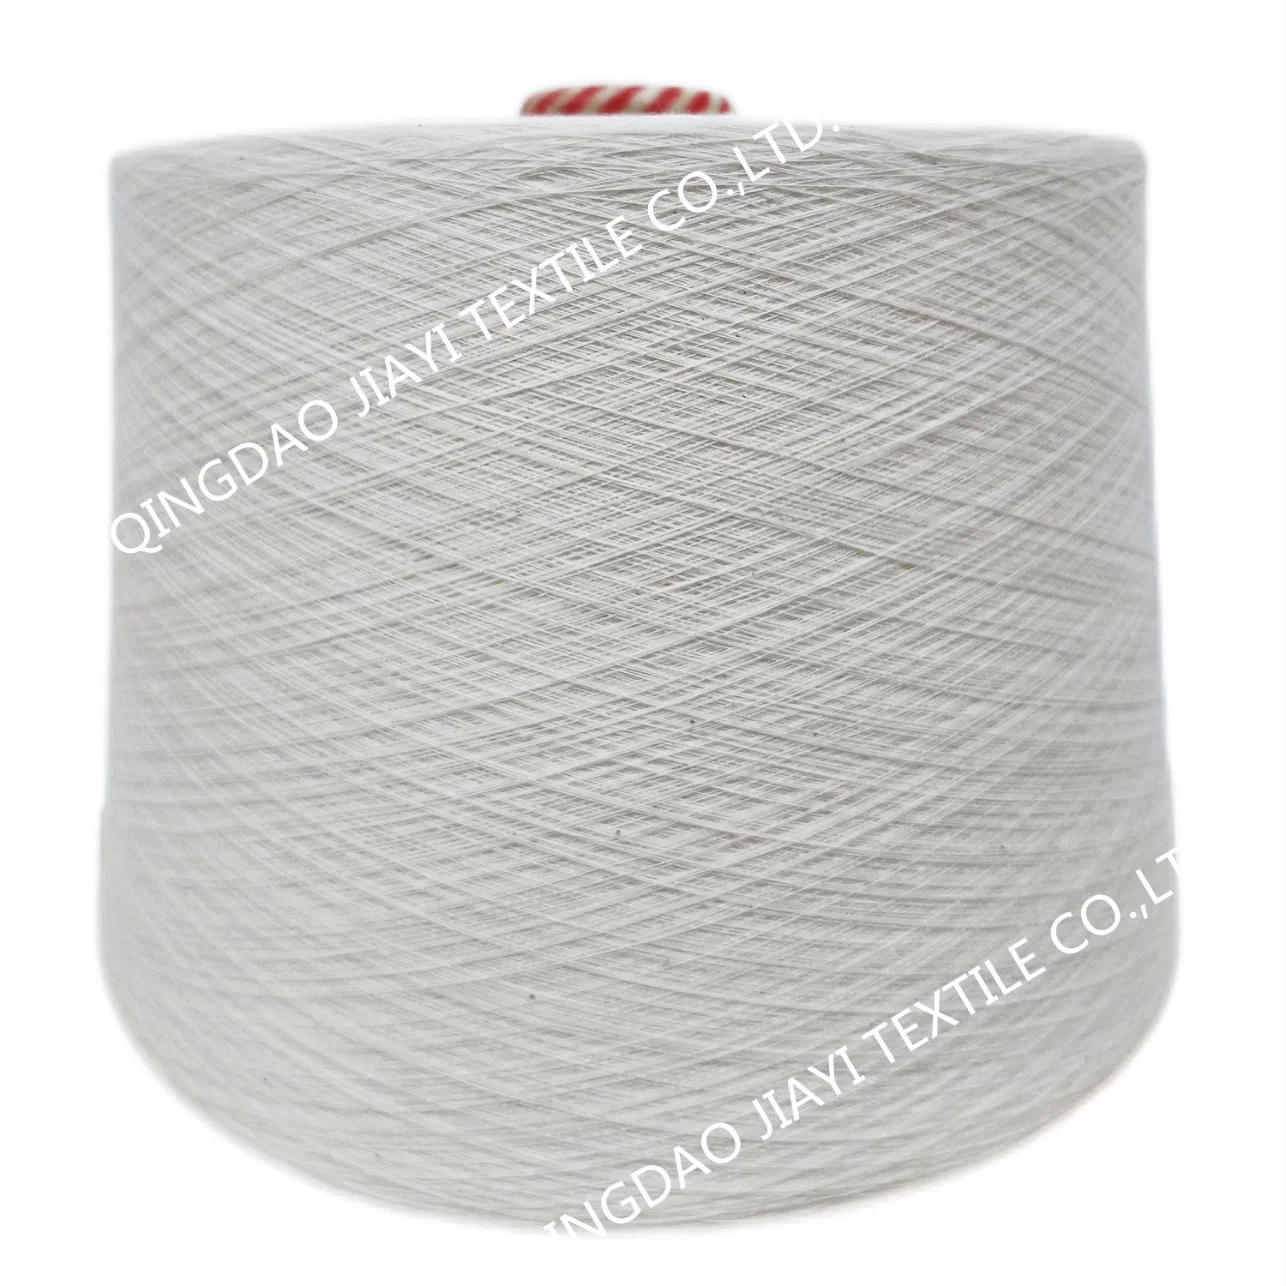 Grs Recycled Cotton Organic Compact Siro Combed Carded 40s Ring Spun Weaving Knitting Yarn